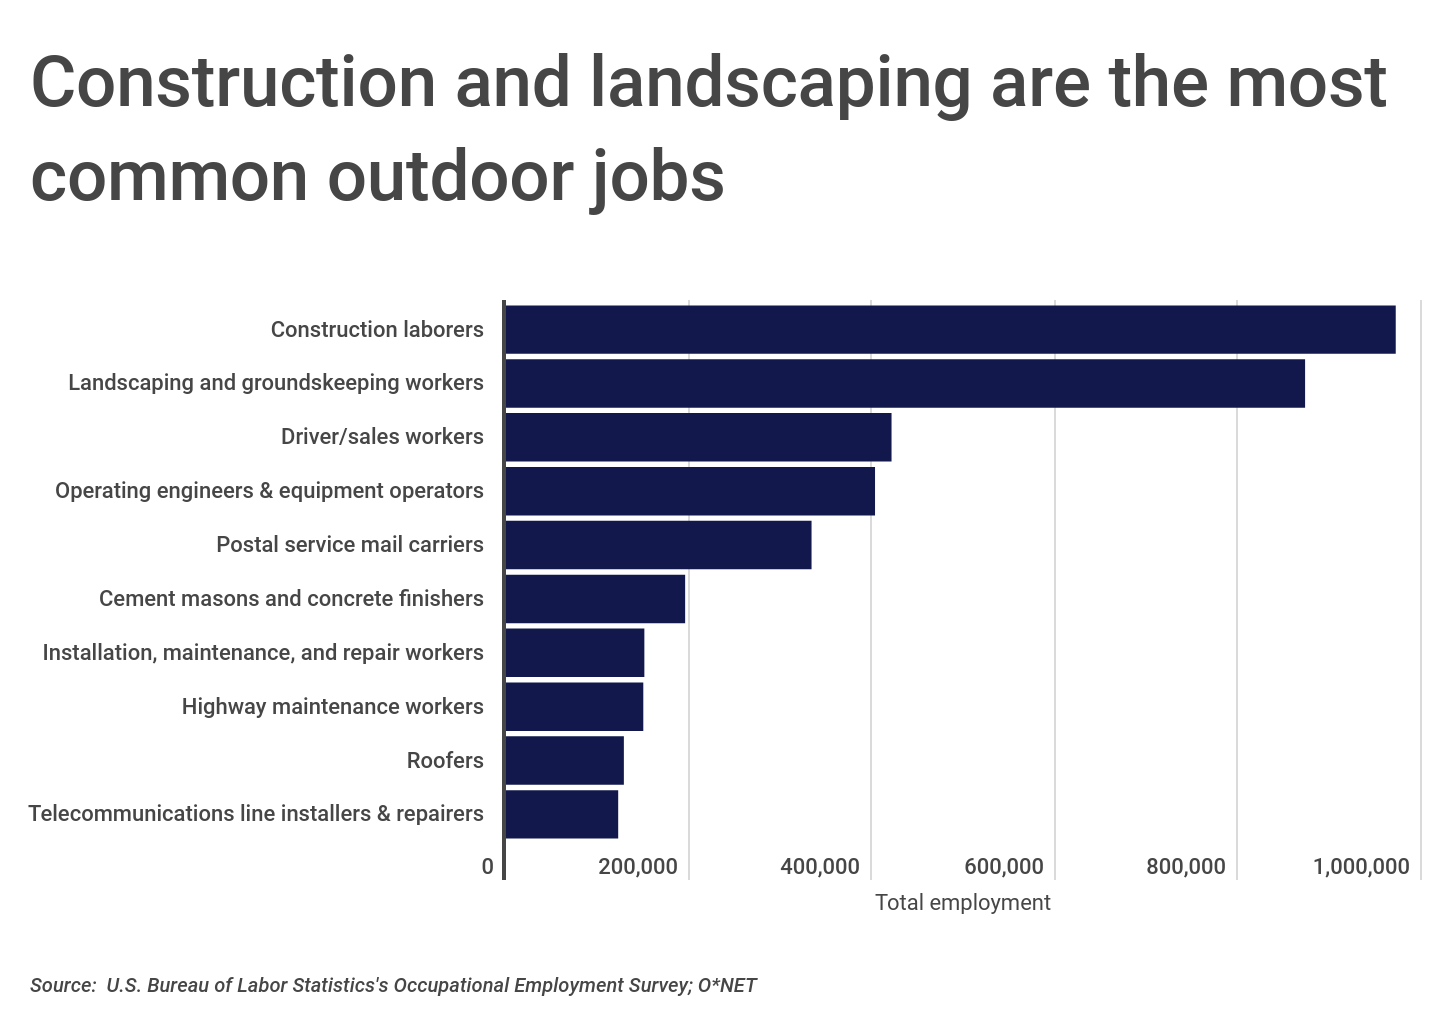 Chart1_Construction and landscaping are the most common outdoor jobs